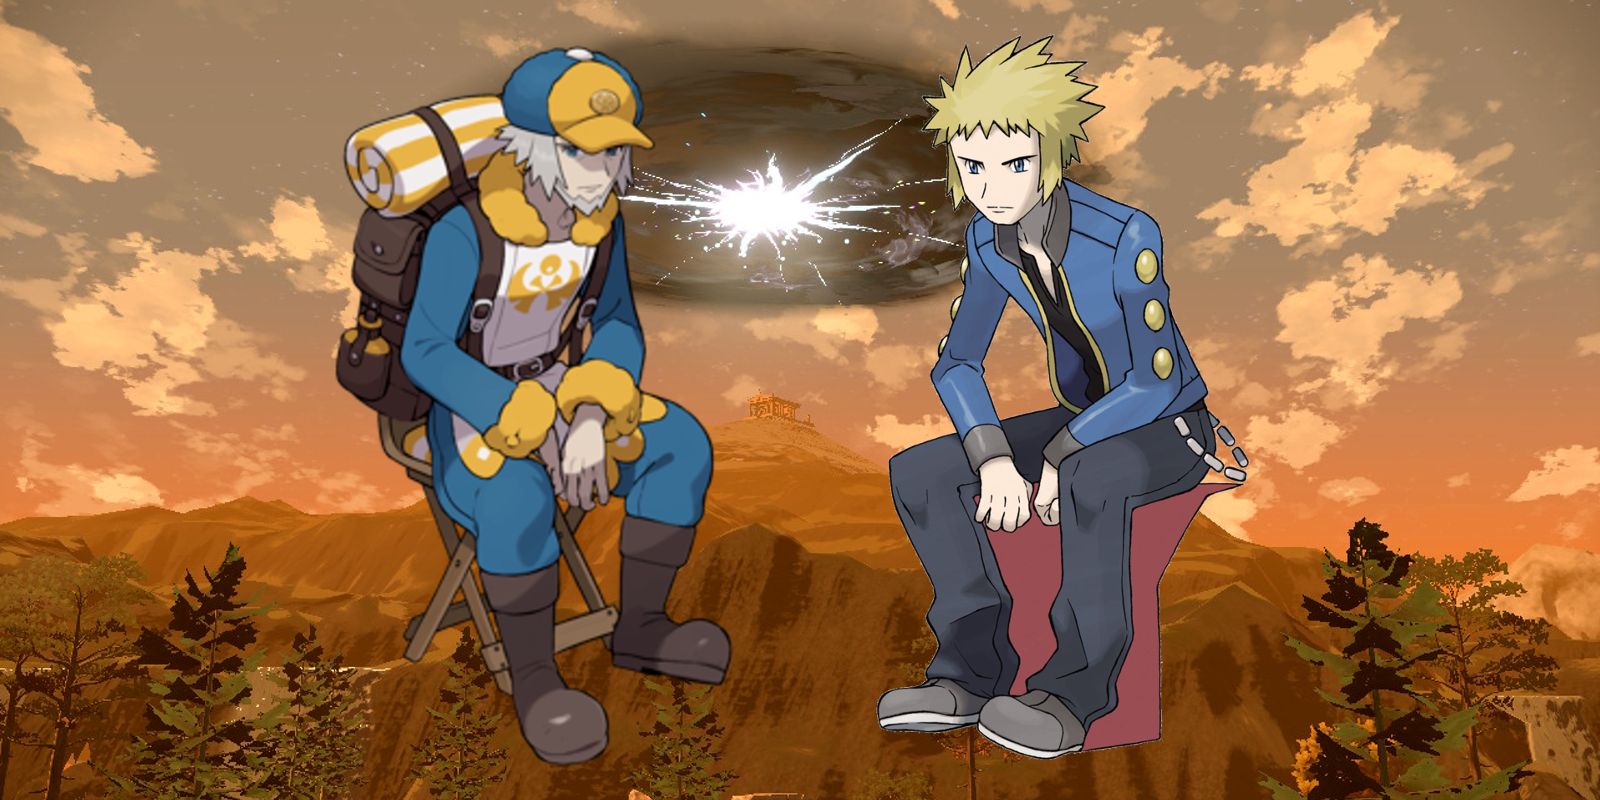 An image of Volkner from BDSP and Ginter from Legends: Arceus